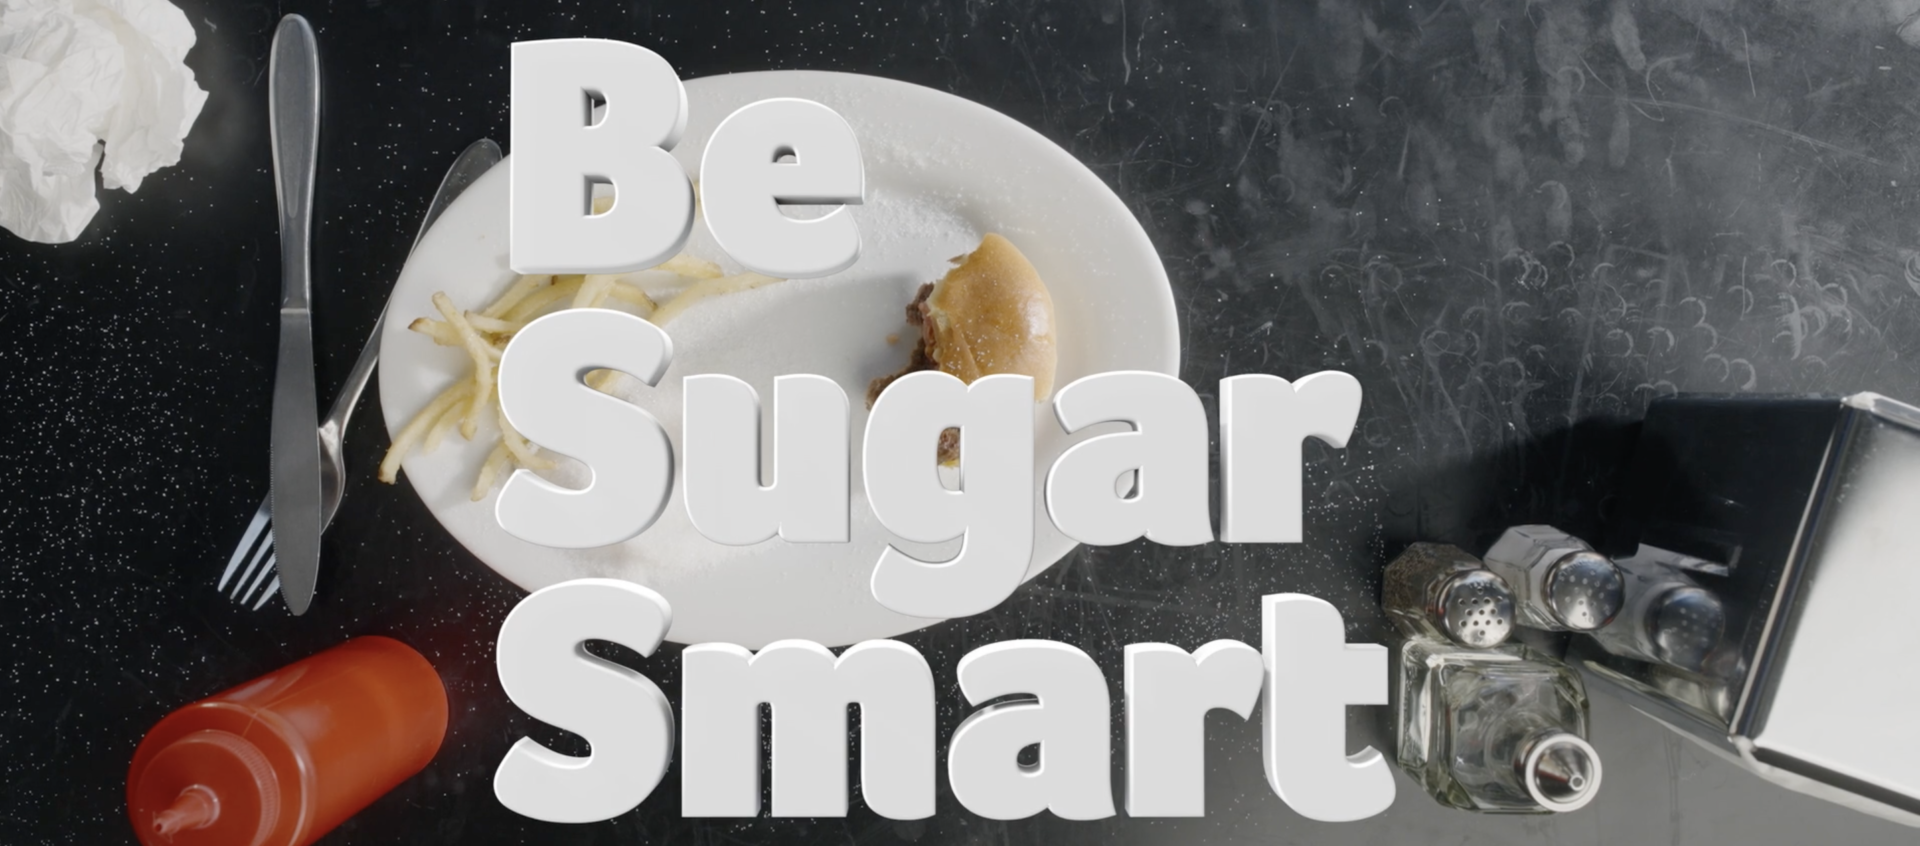 A restaurant table is showing a plate with a half eaten burger and a few leftover fries left on it. The title on the image says "Be Sugar Smart"